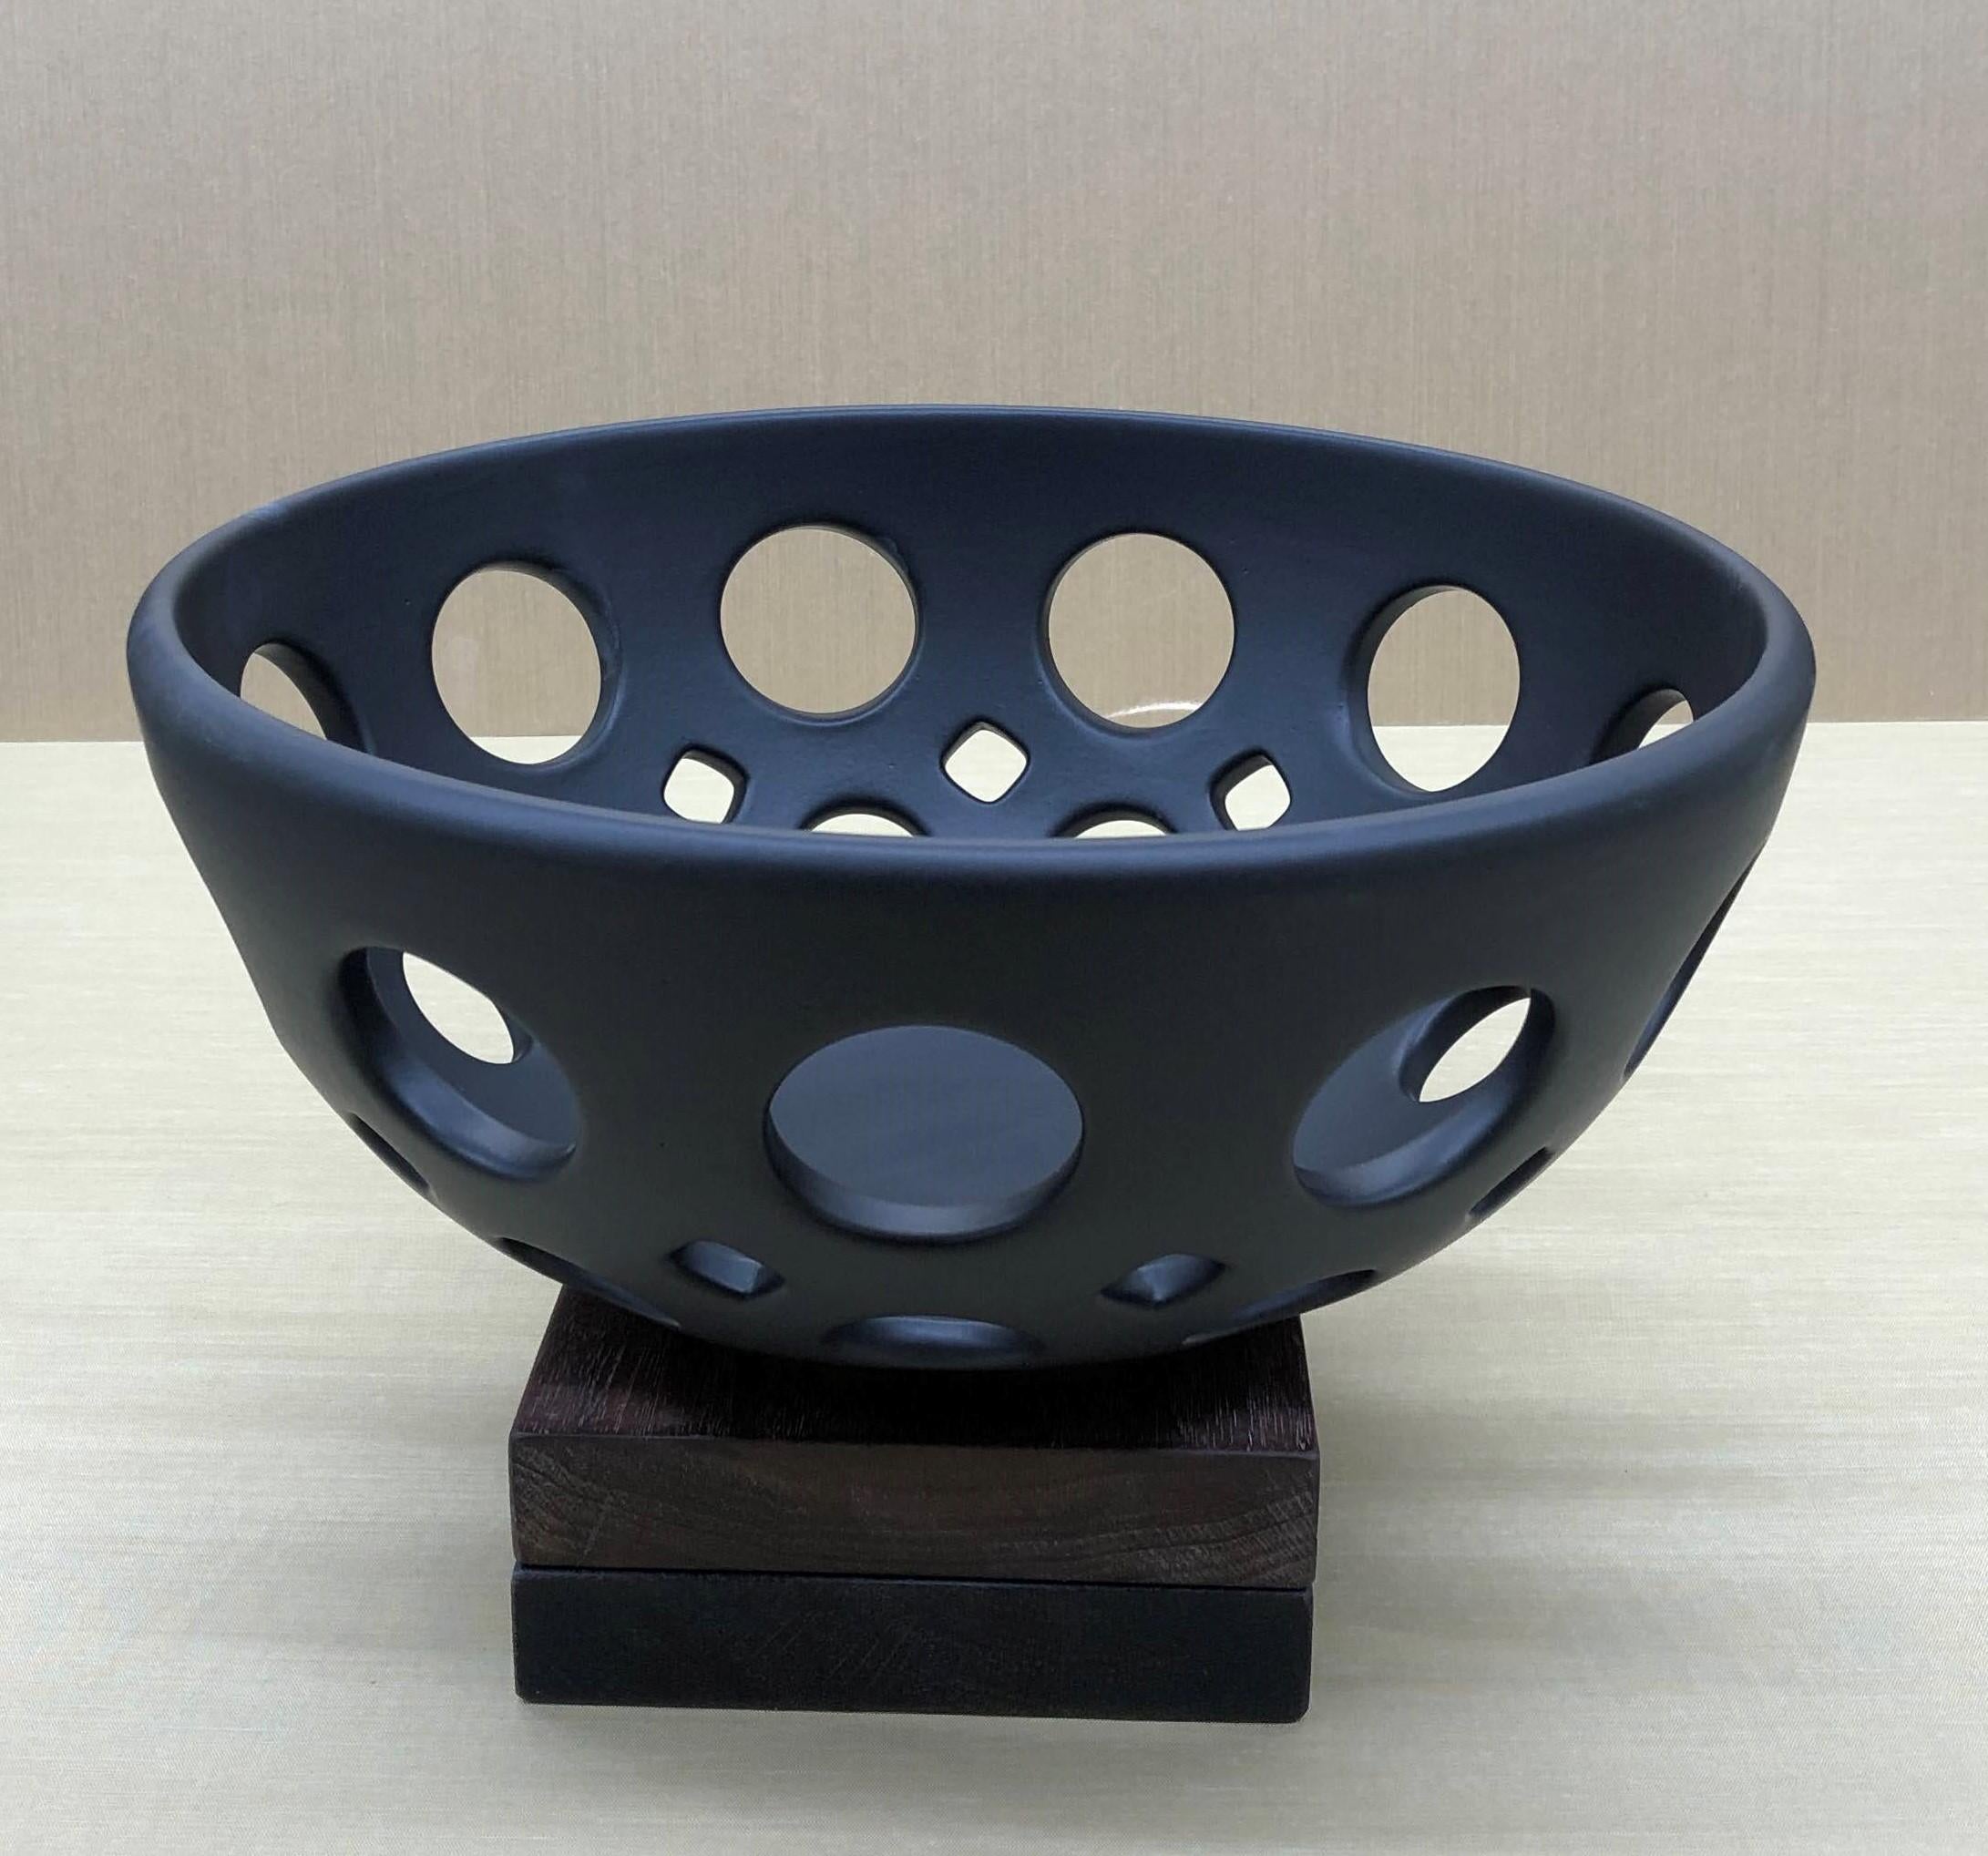 Inspired by Mid-Century Modern design, this bowl is wheel thrown and hand pierced stoneware. Small holes are created when the clay is still wet and then each hole is painstakingly enlarged and smoothed when the clay is bone dry. It is then fired